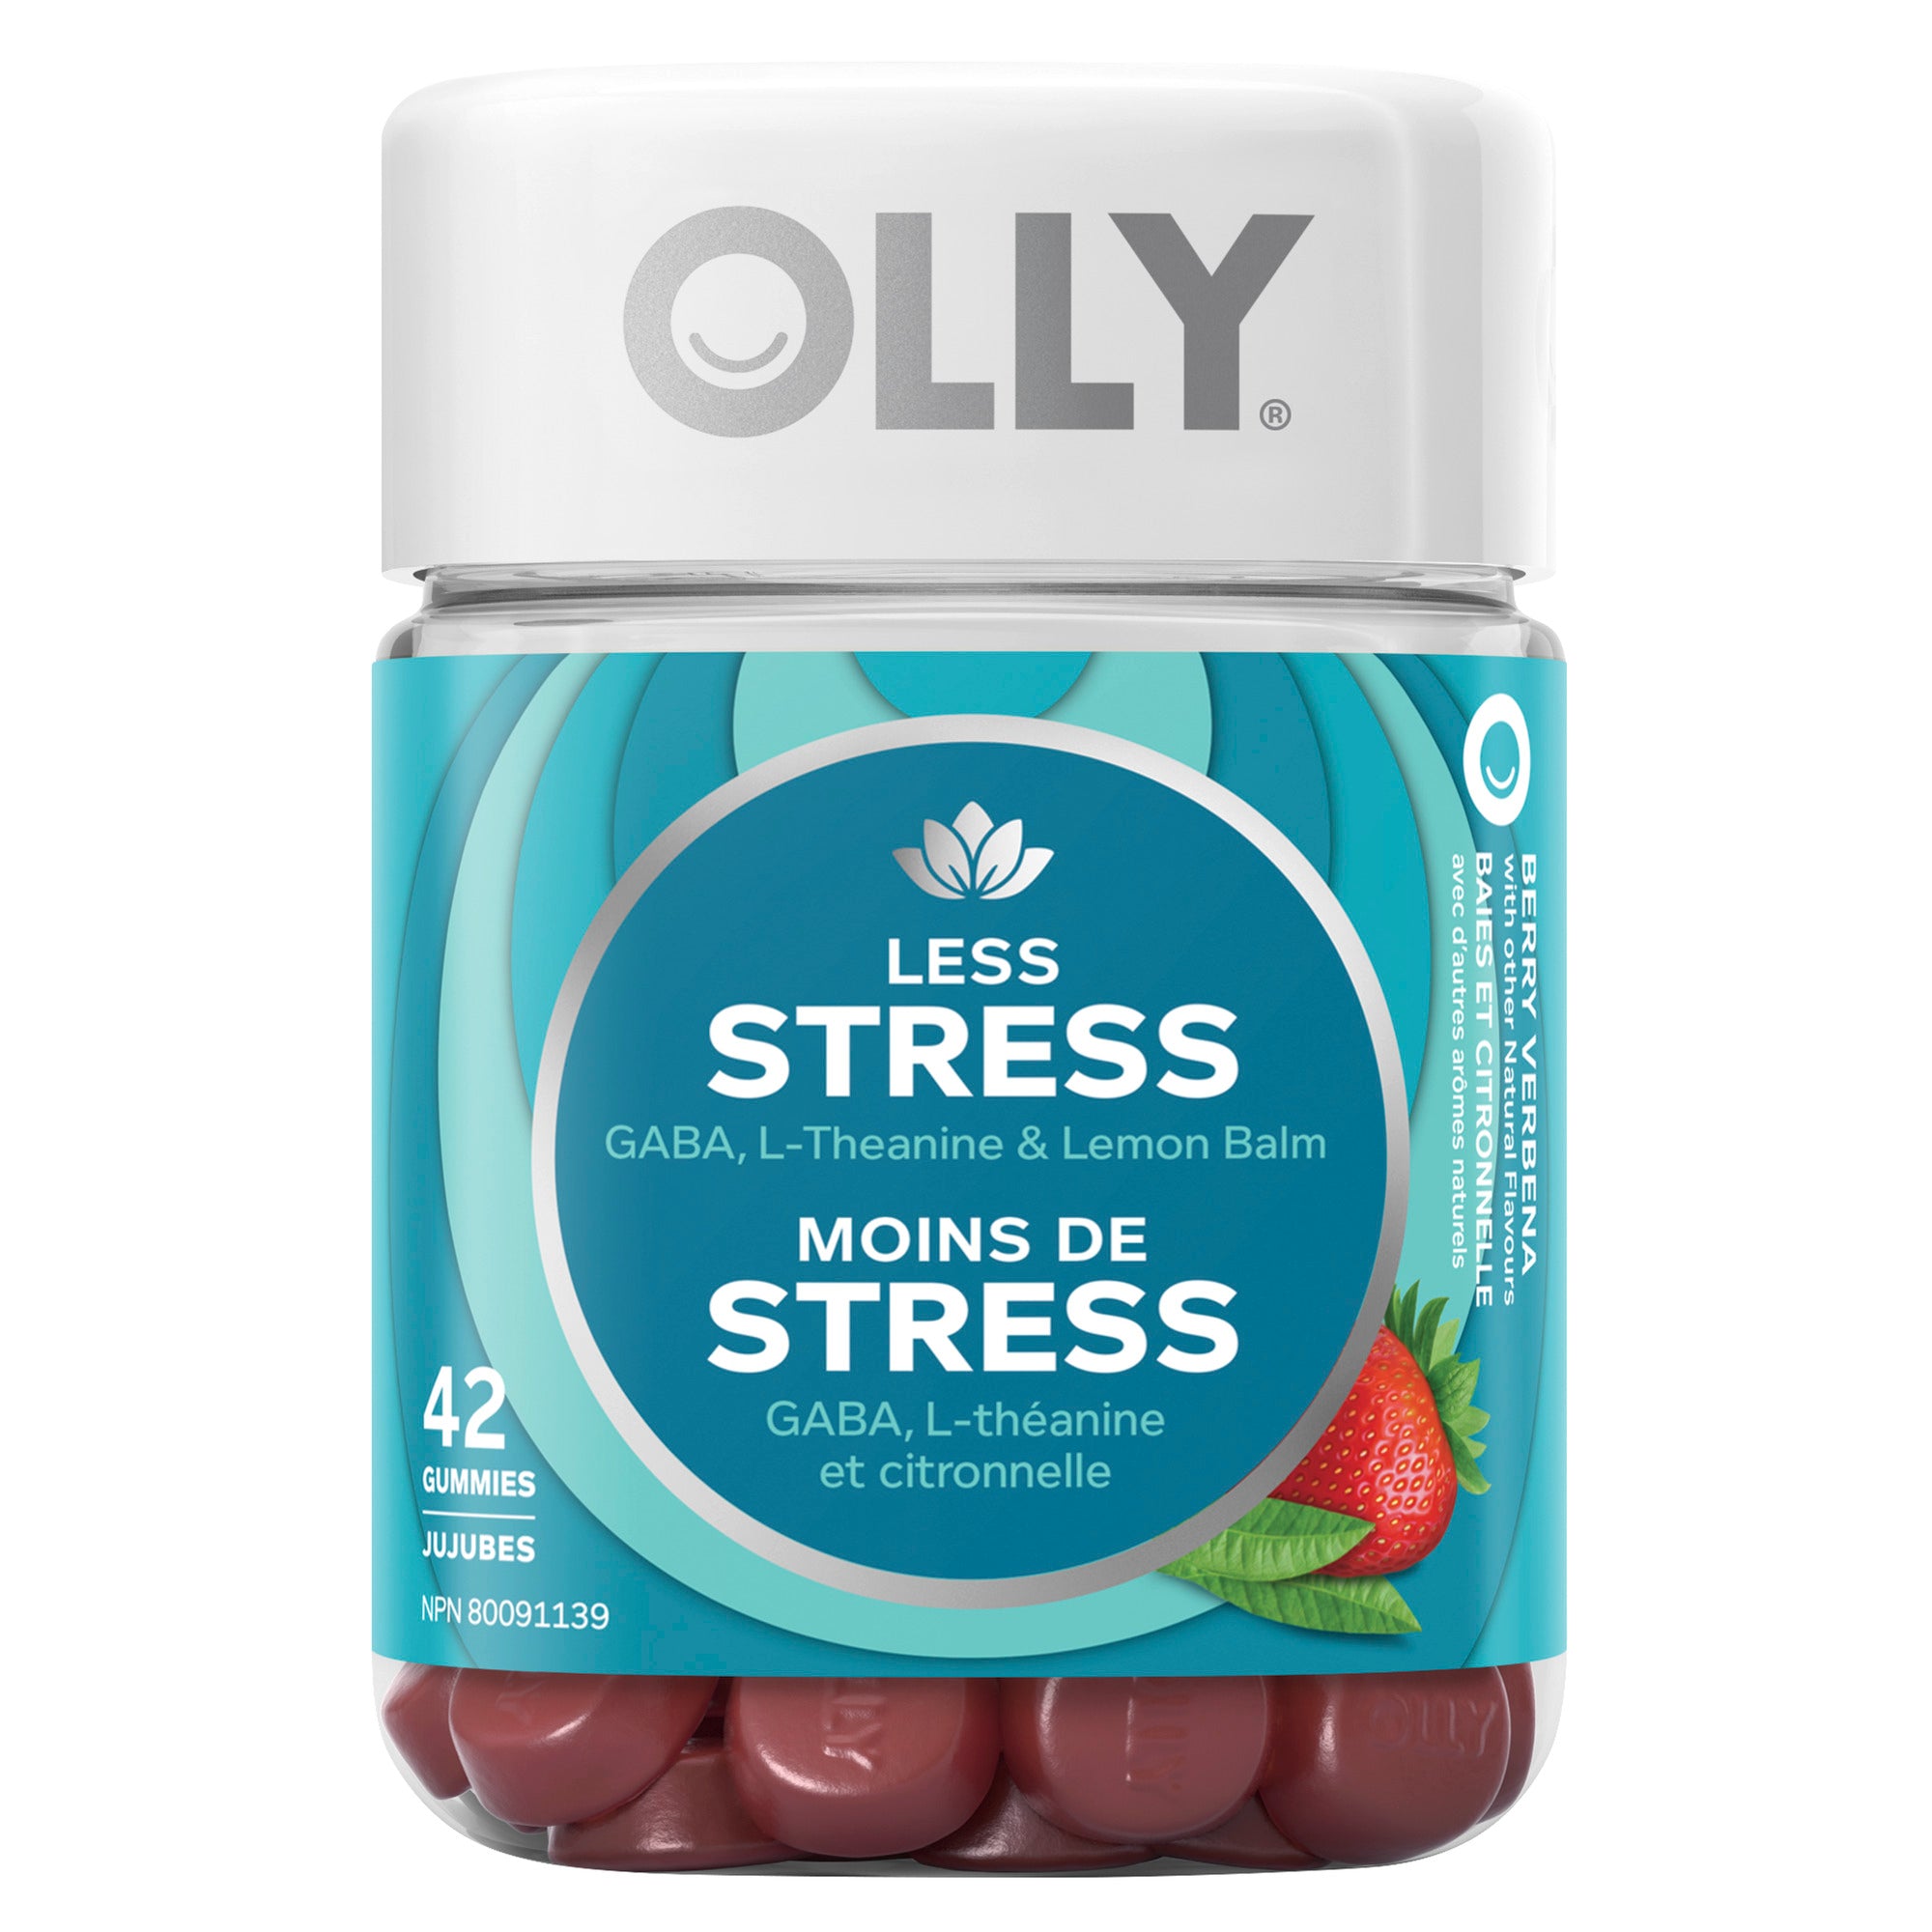 Showing the front side view of the light blue OLLY Less Stress Gummy 42 gummies product packaging.